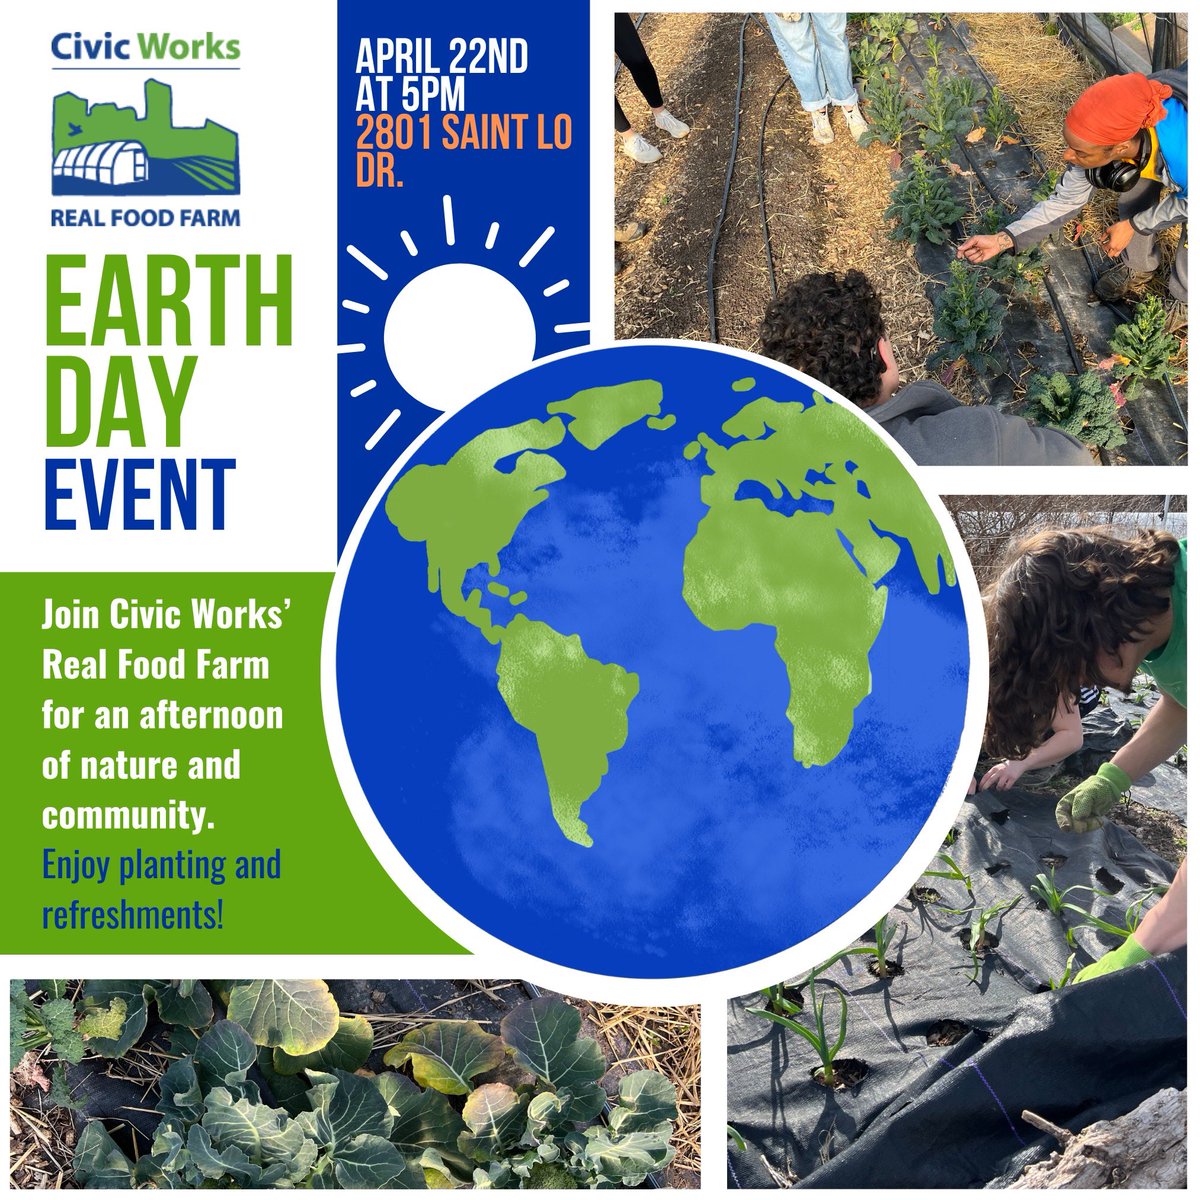 Join us in celebrating Earth Day at Civic Works’ Real Food Farm! 🌎💚 On April 22nd, from 5 pm to 7 pm, we invite you to an outdoor happy hour featuring drinks and snacks! RSVP at our Linktree below: linktr.ee/civicworks